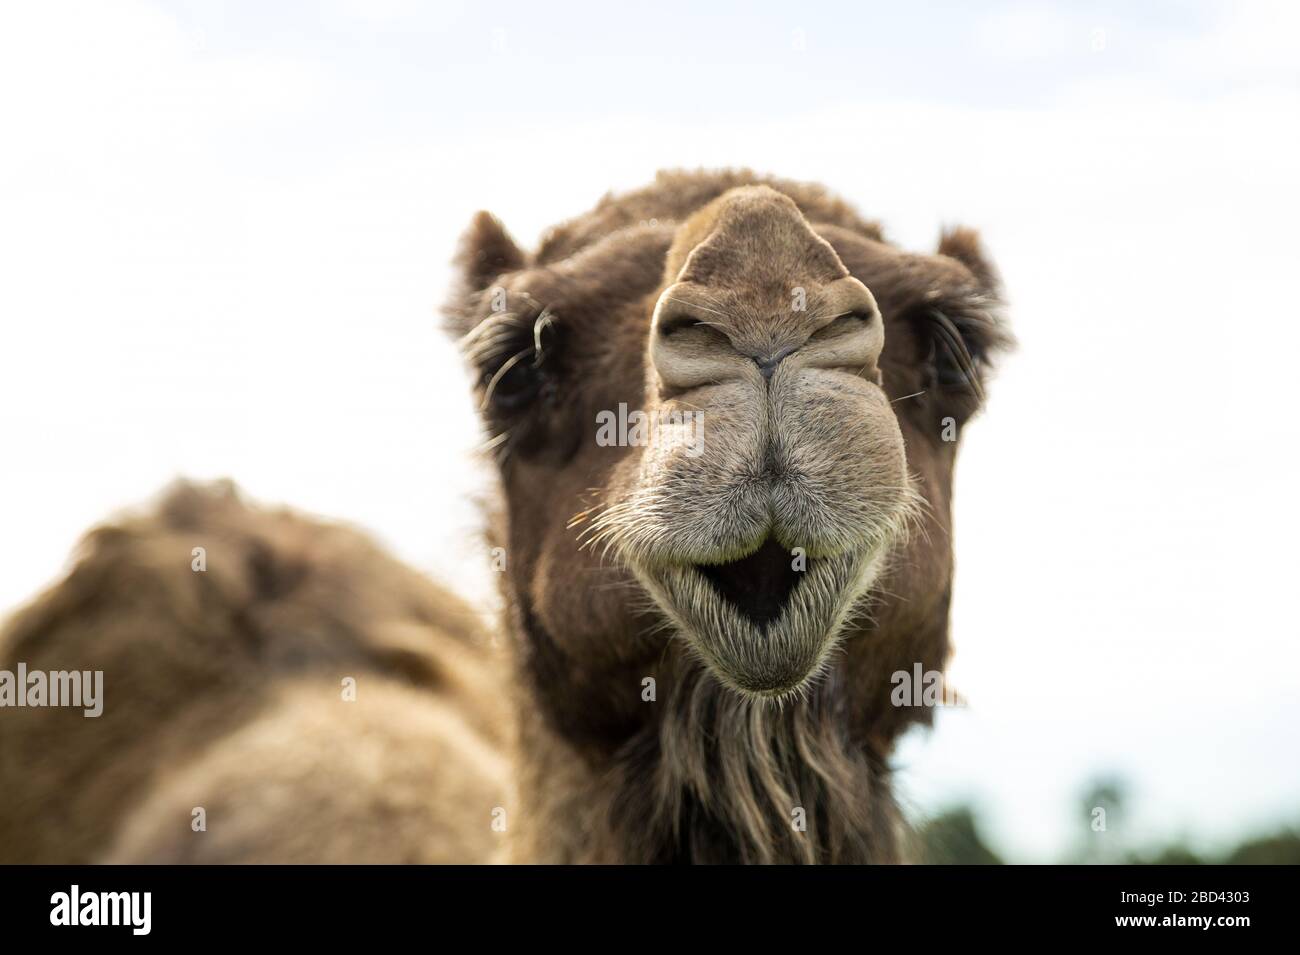 Closeup of a camel looking straight at the camera pulling a funny face Stock Photo